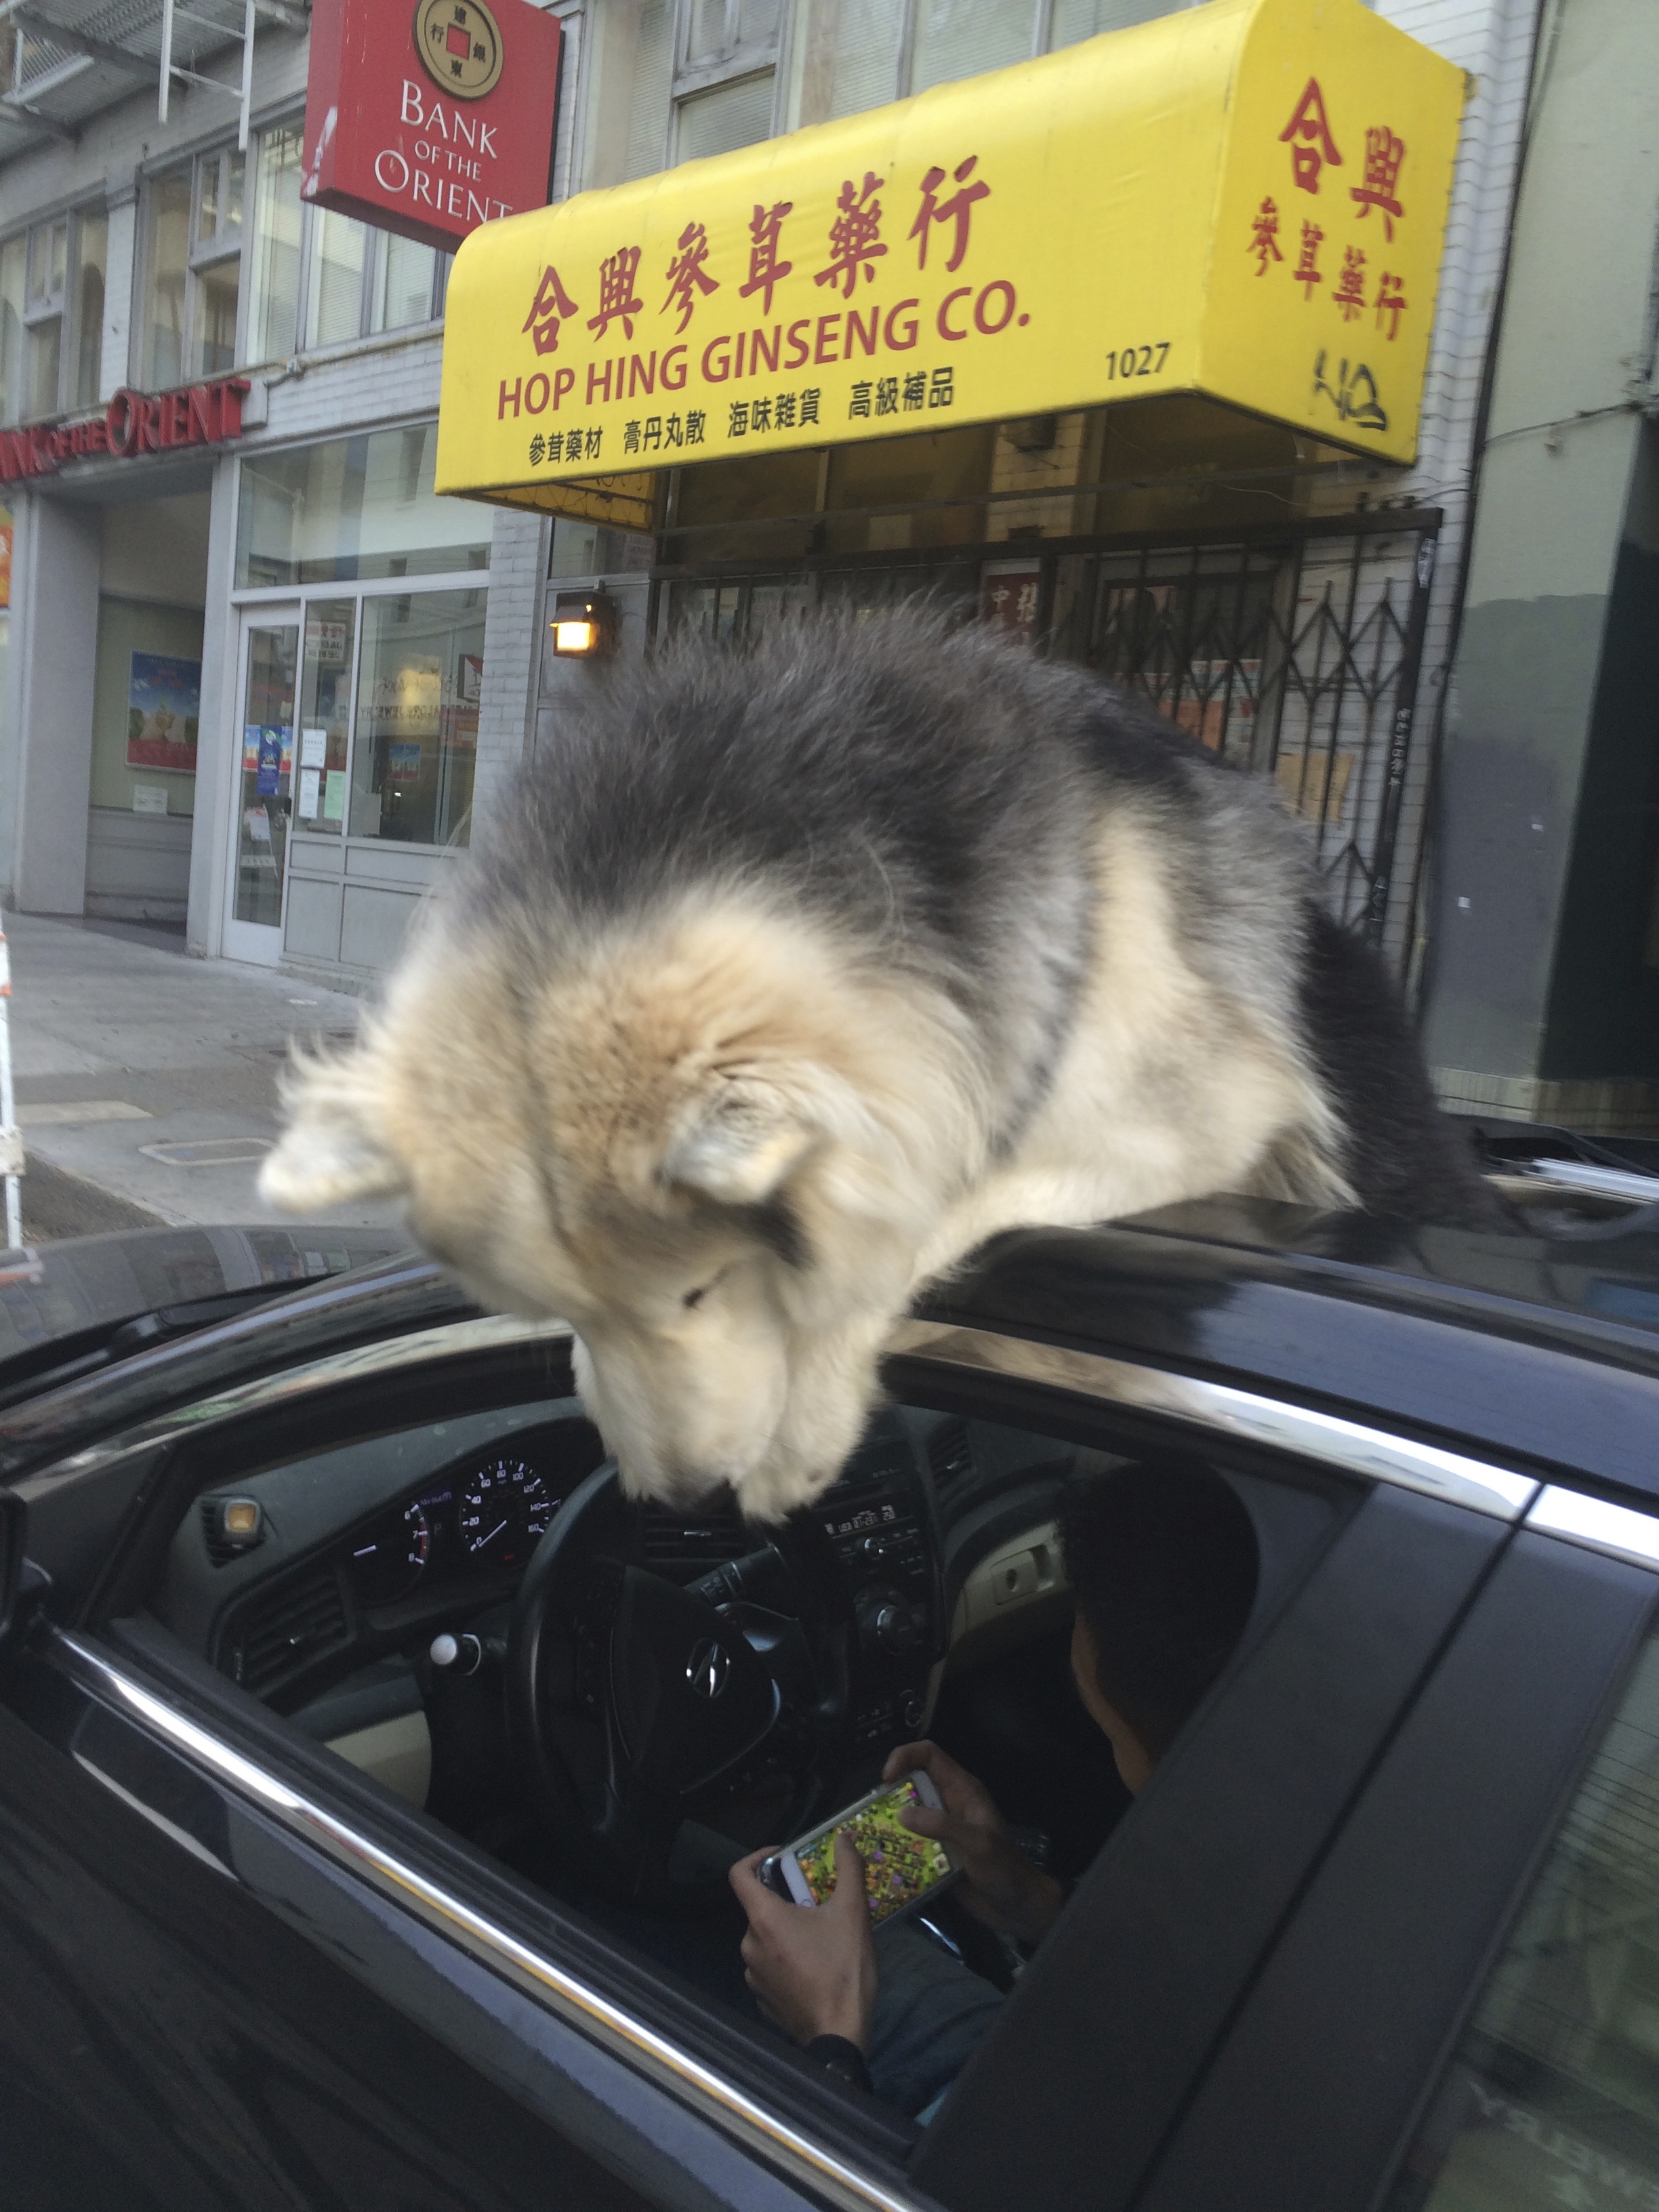 Huge Wooly Malamute Sticking His Head Out A Car Sun Roof And Looking In The Driver's Side Window